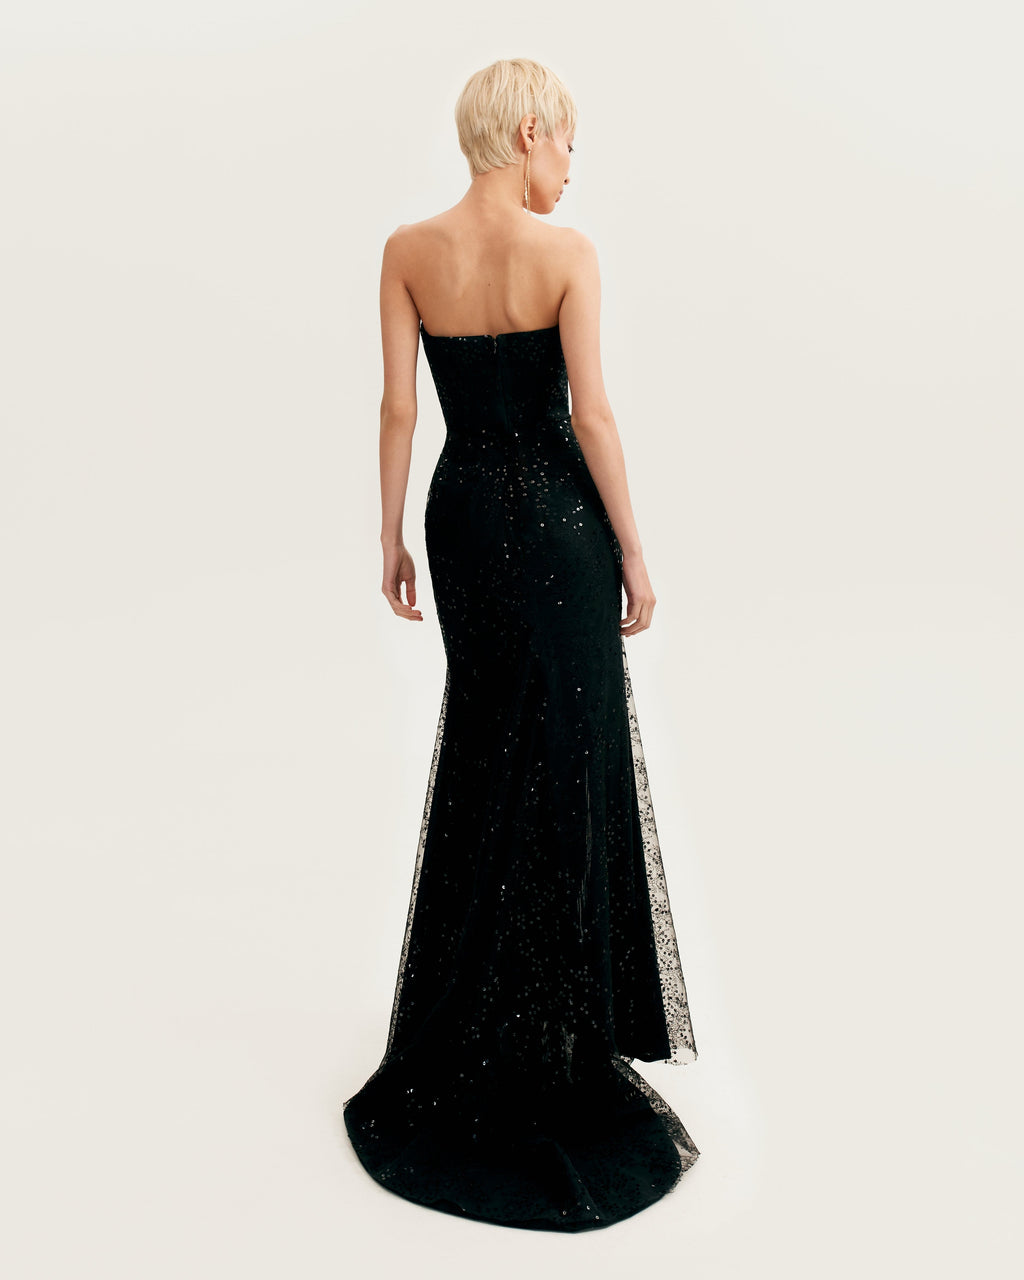 Radiant maxi dress in black covered in sequins, Xo Xo